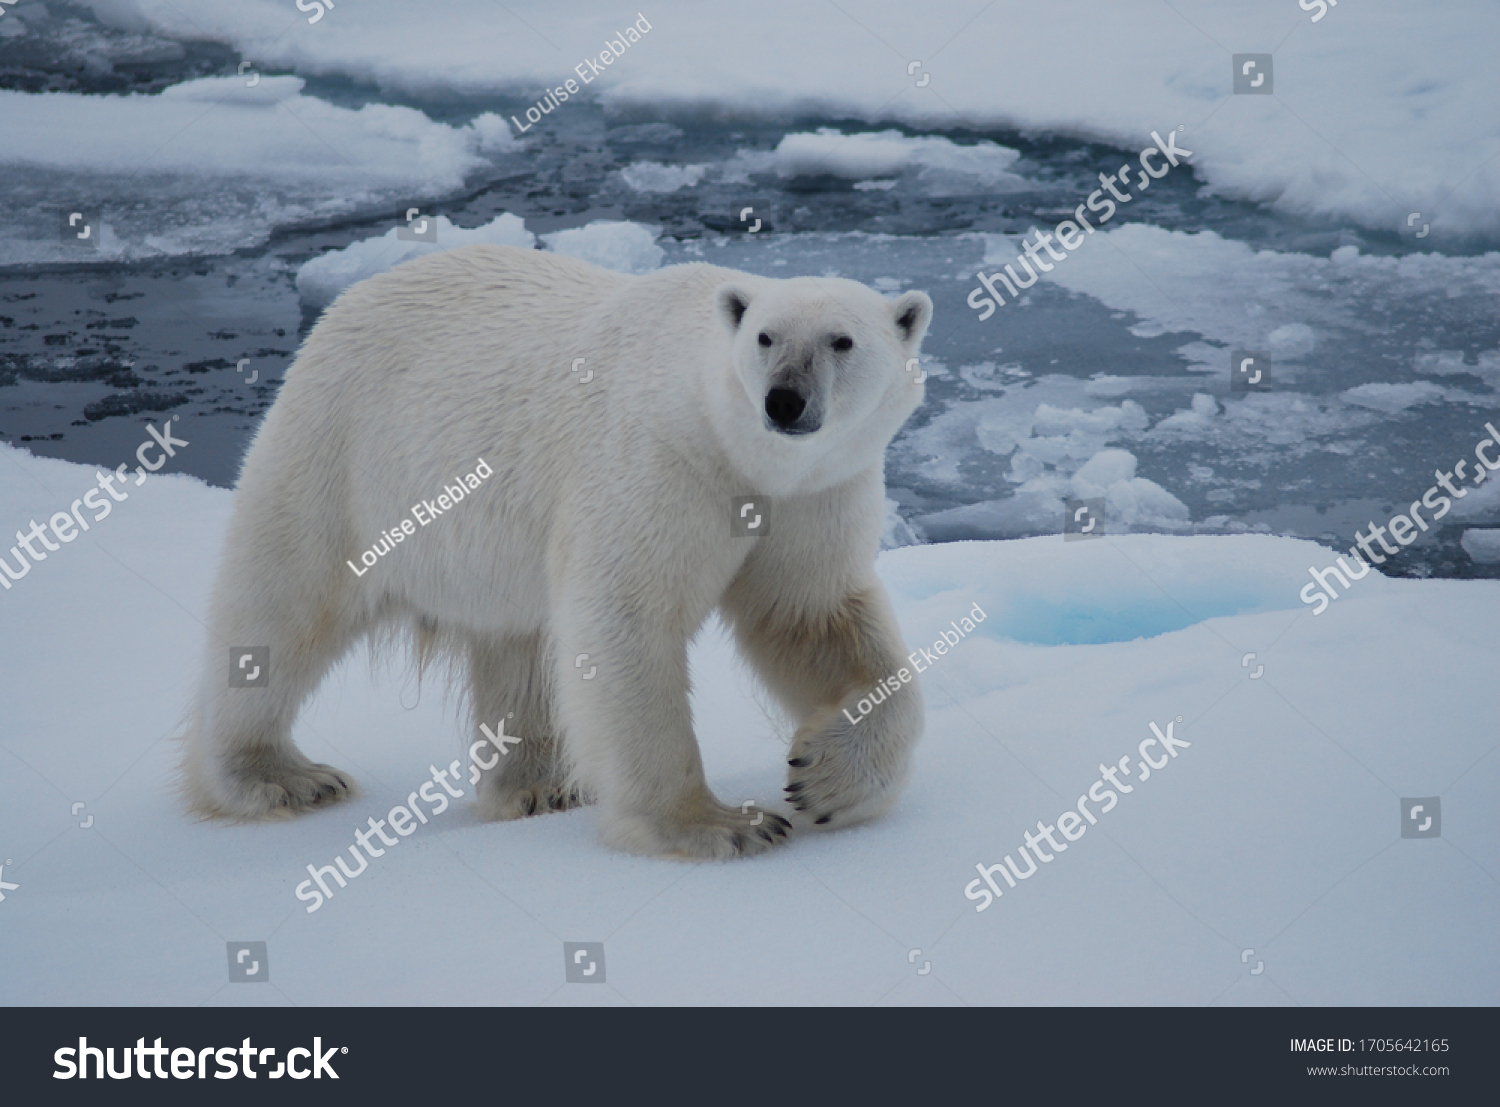 Polar bear walking in the Svalbard area searching for food #1705642165